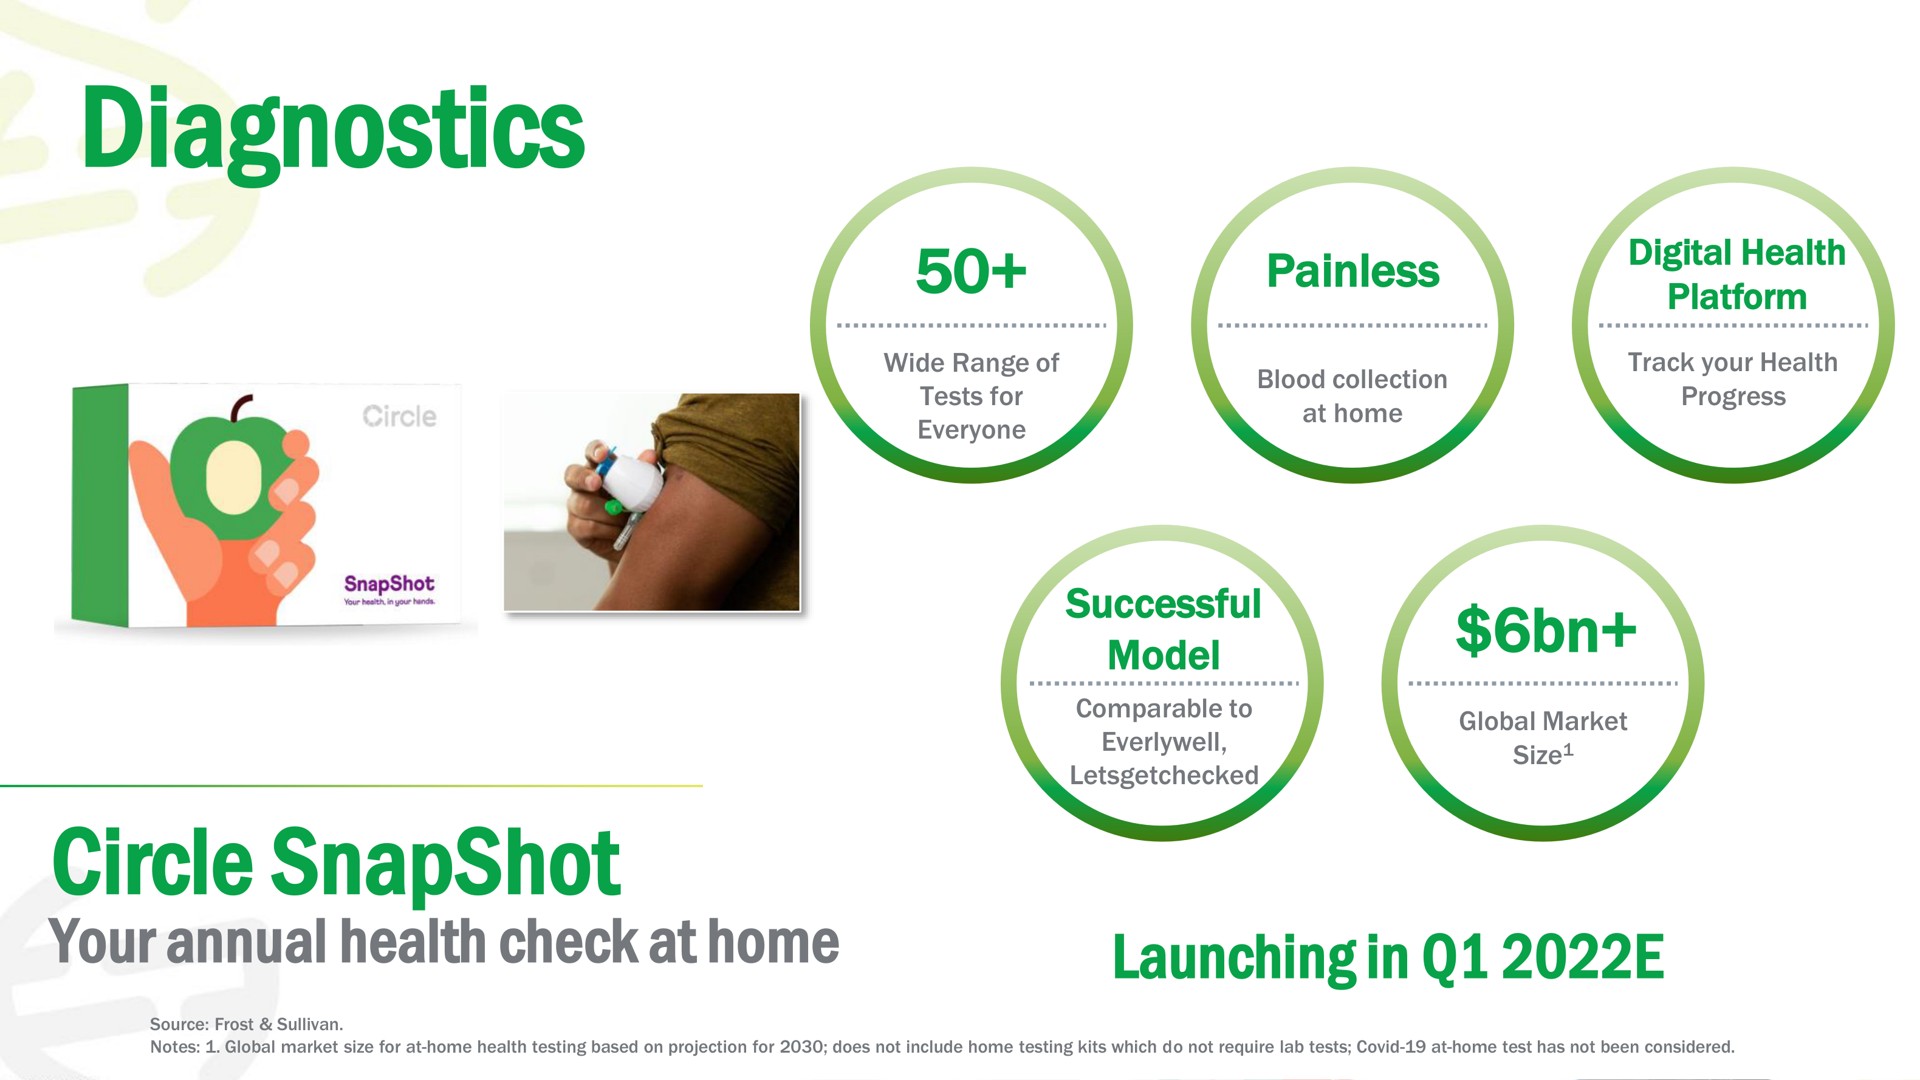 diagnostics circle snapshot your annual health check at home launching in | Prenetics